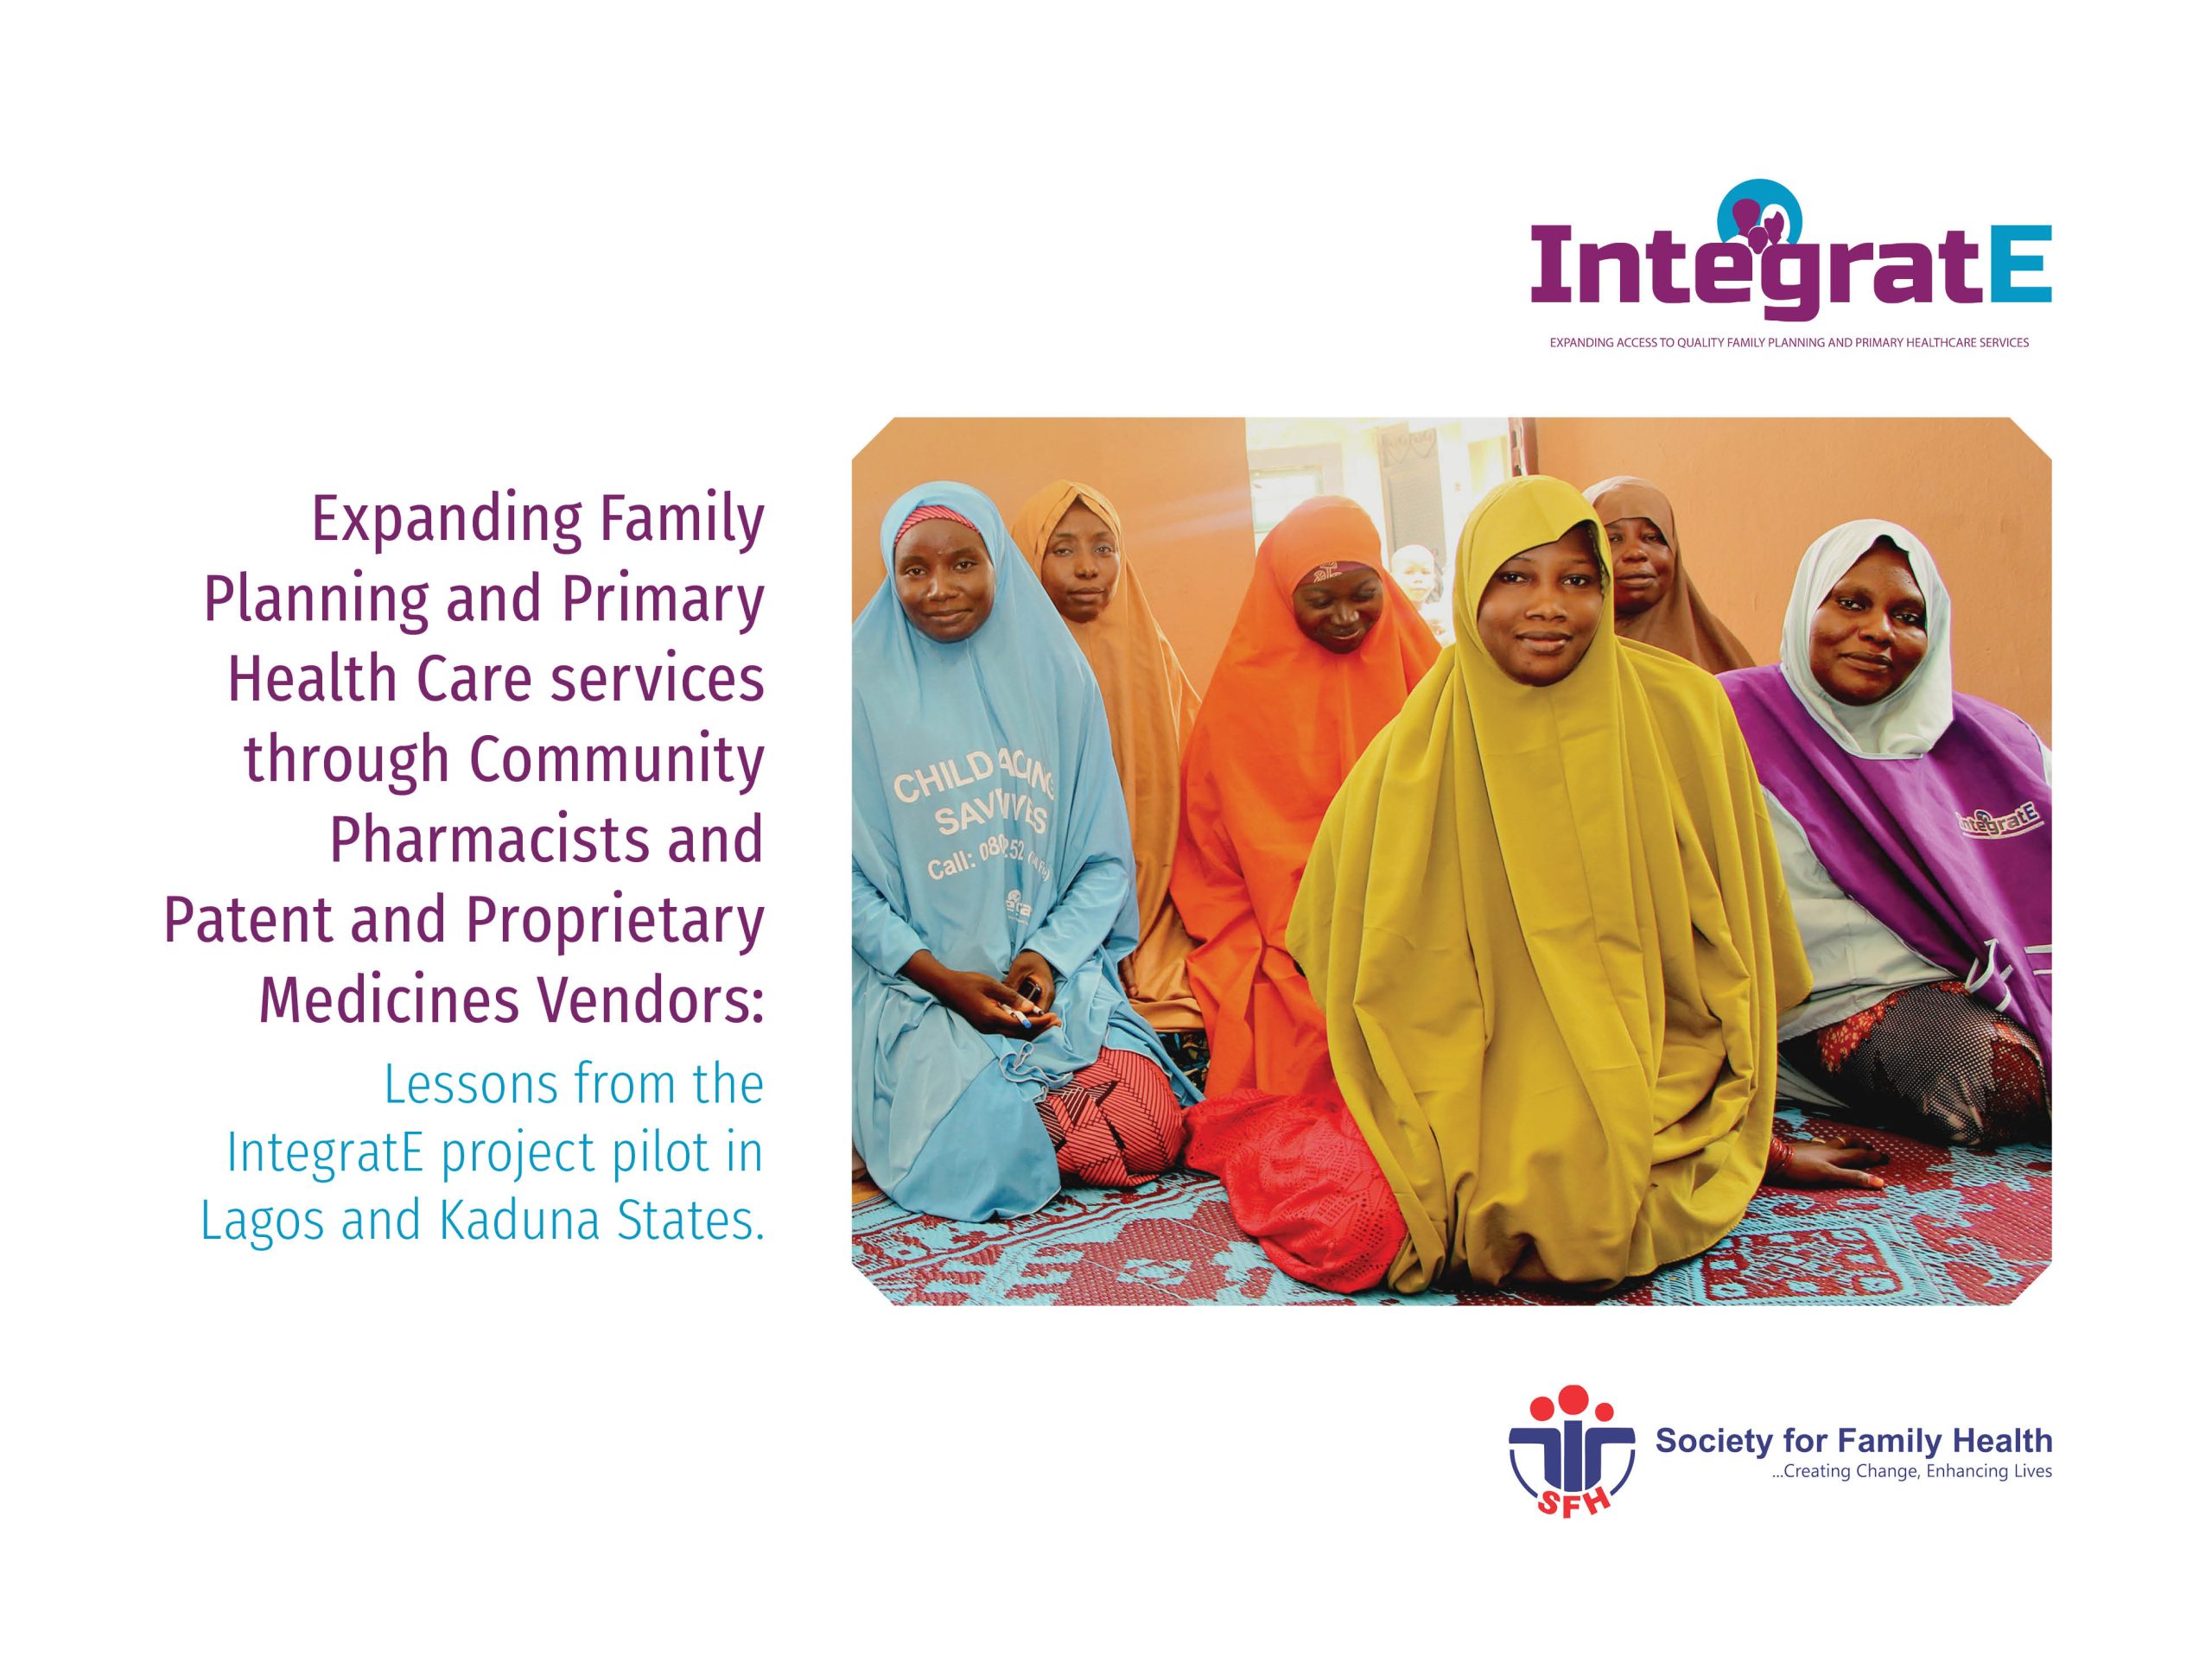 Family Planning, Community Pharmacists, Lesson Learnt from the IntegratE pilot study